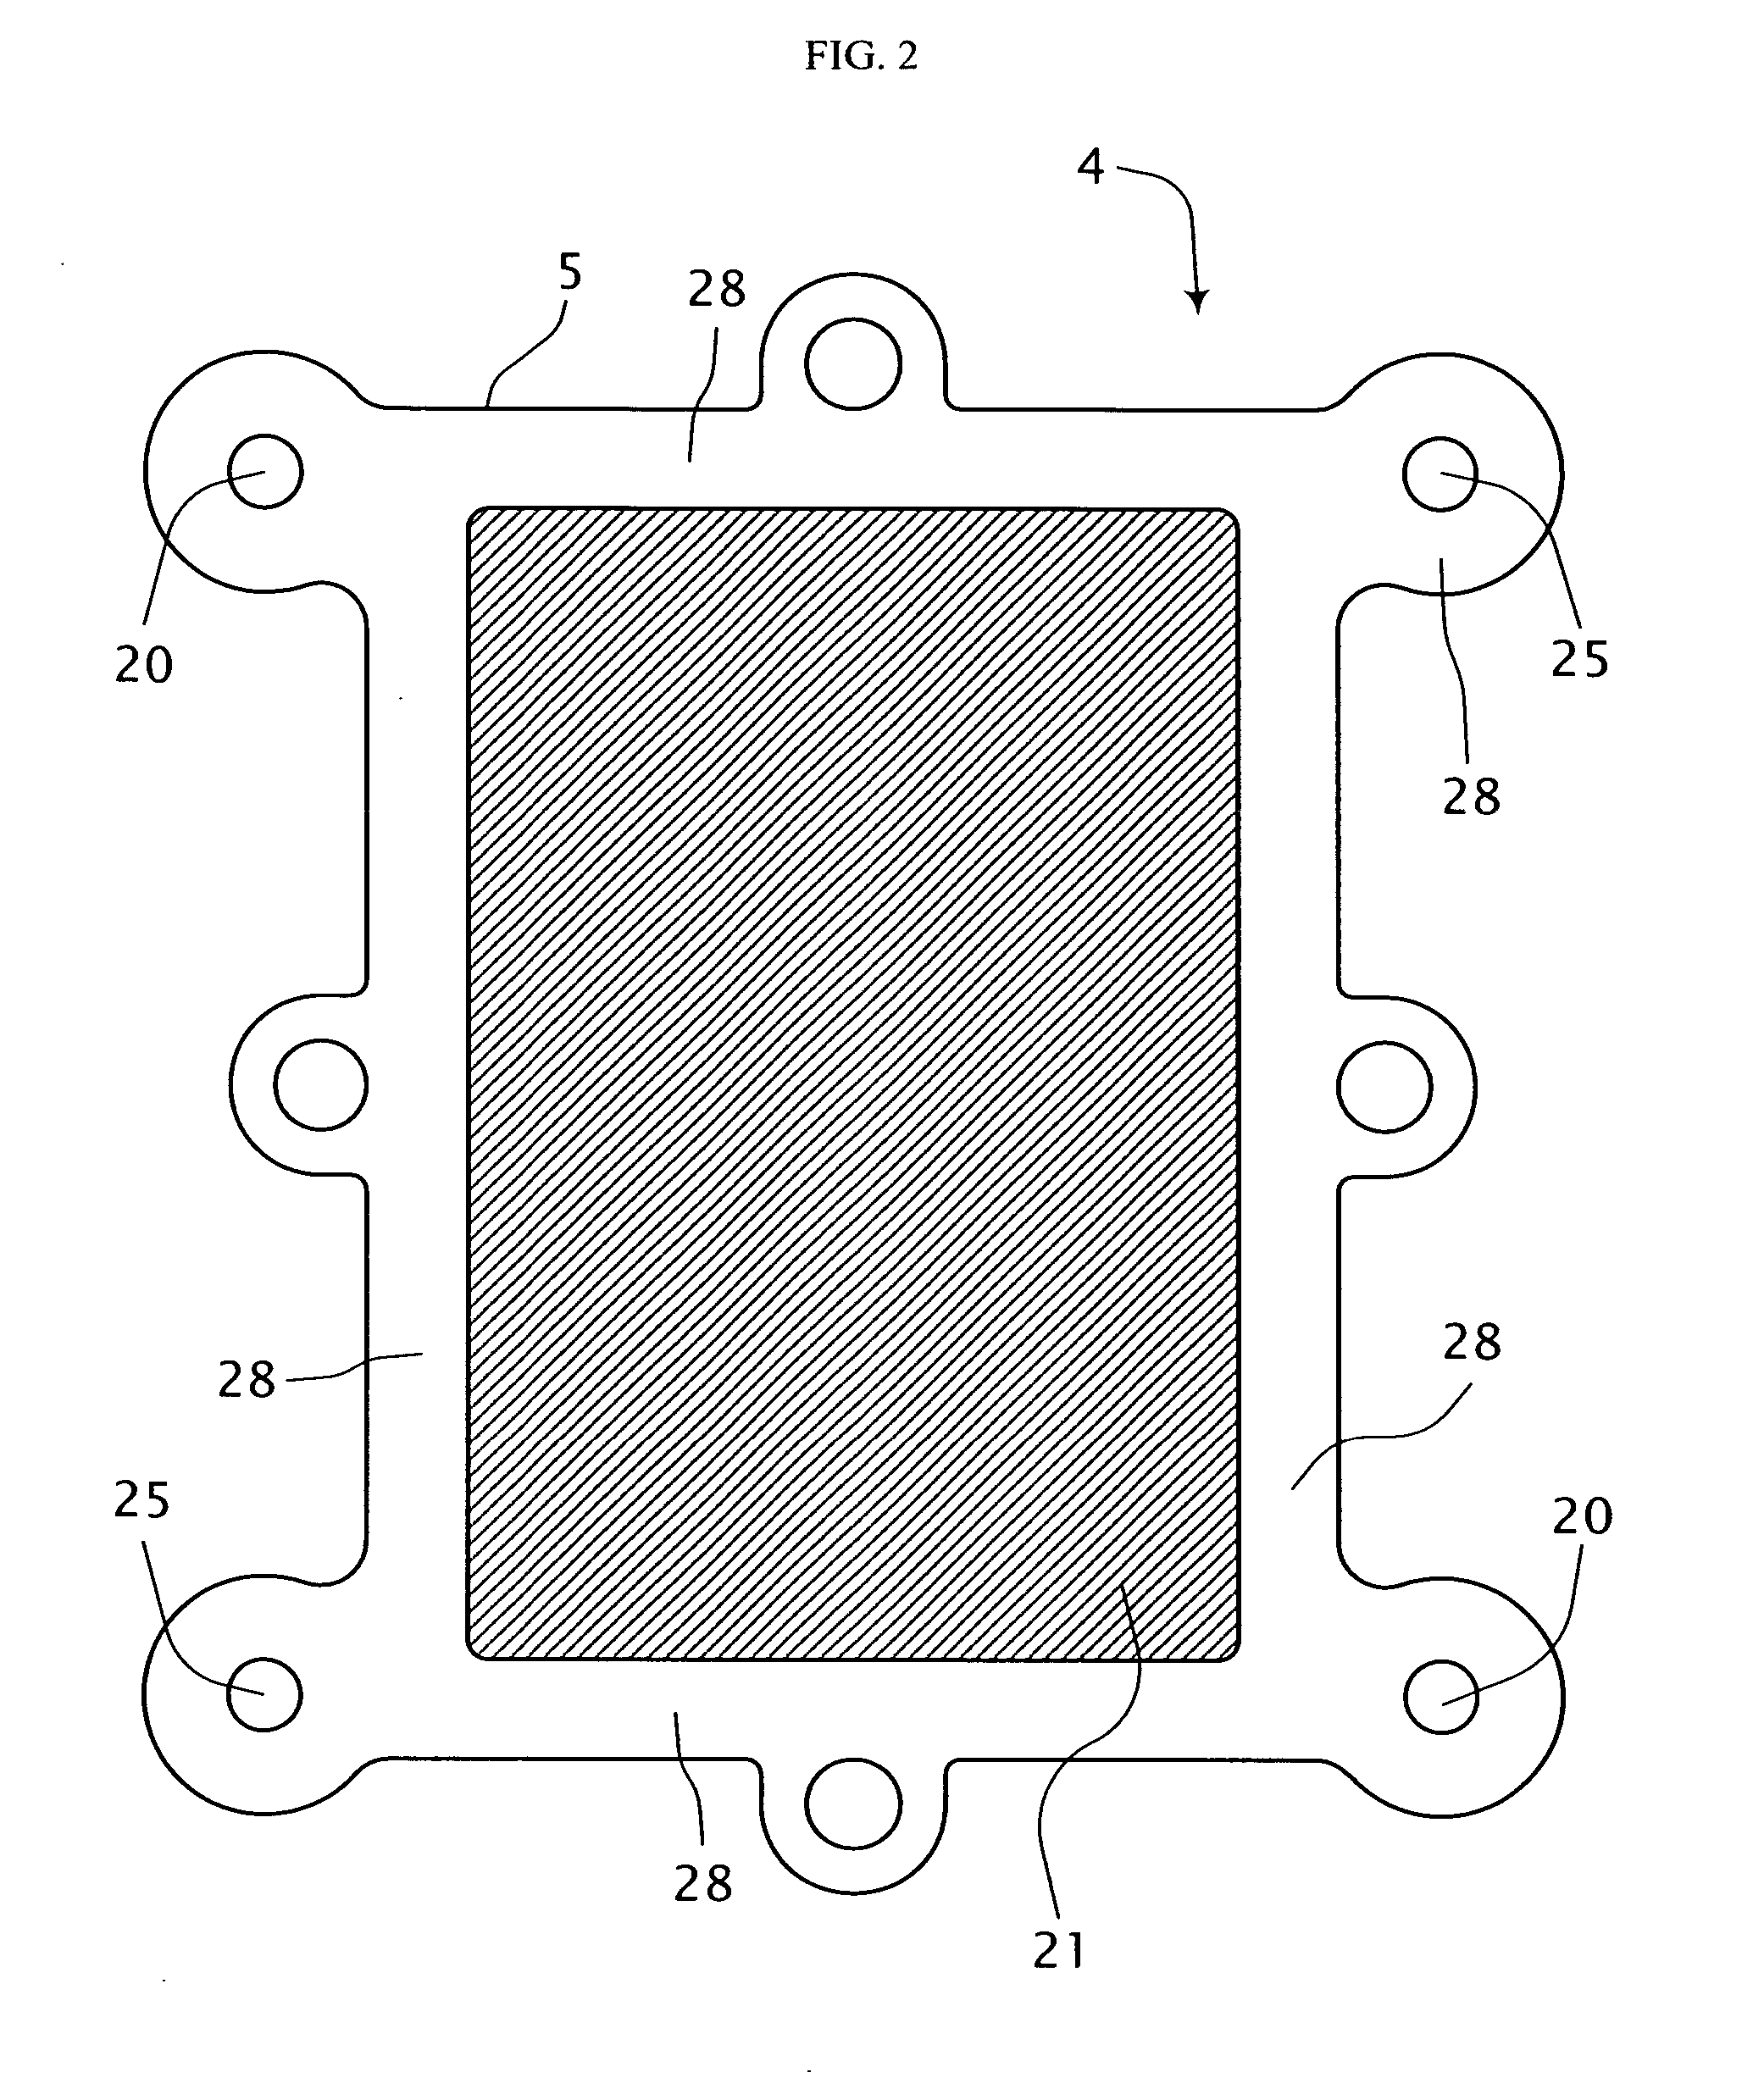 Fuel cell system suitable for complex fuels and a method of operation of the same